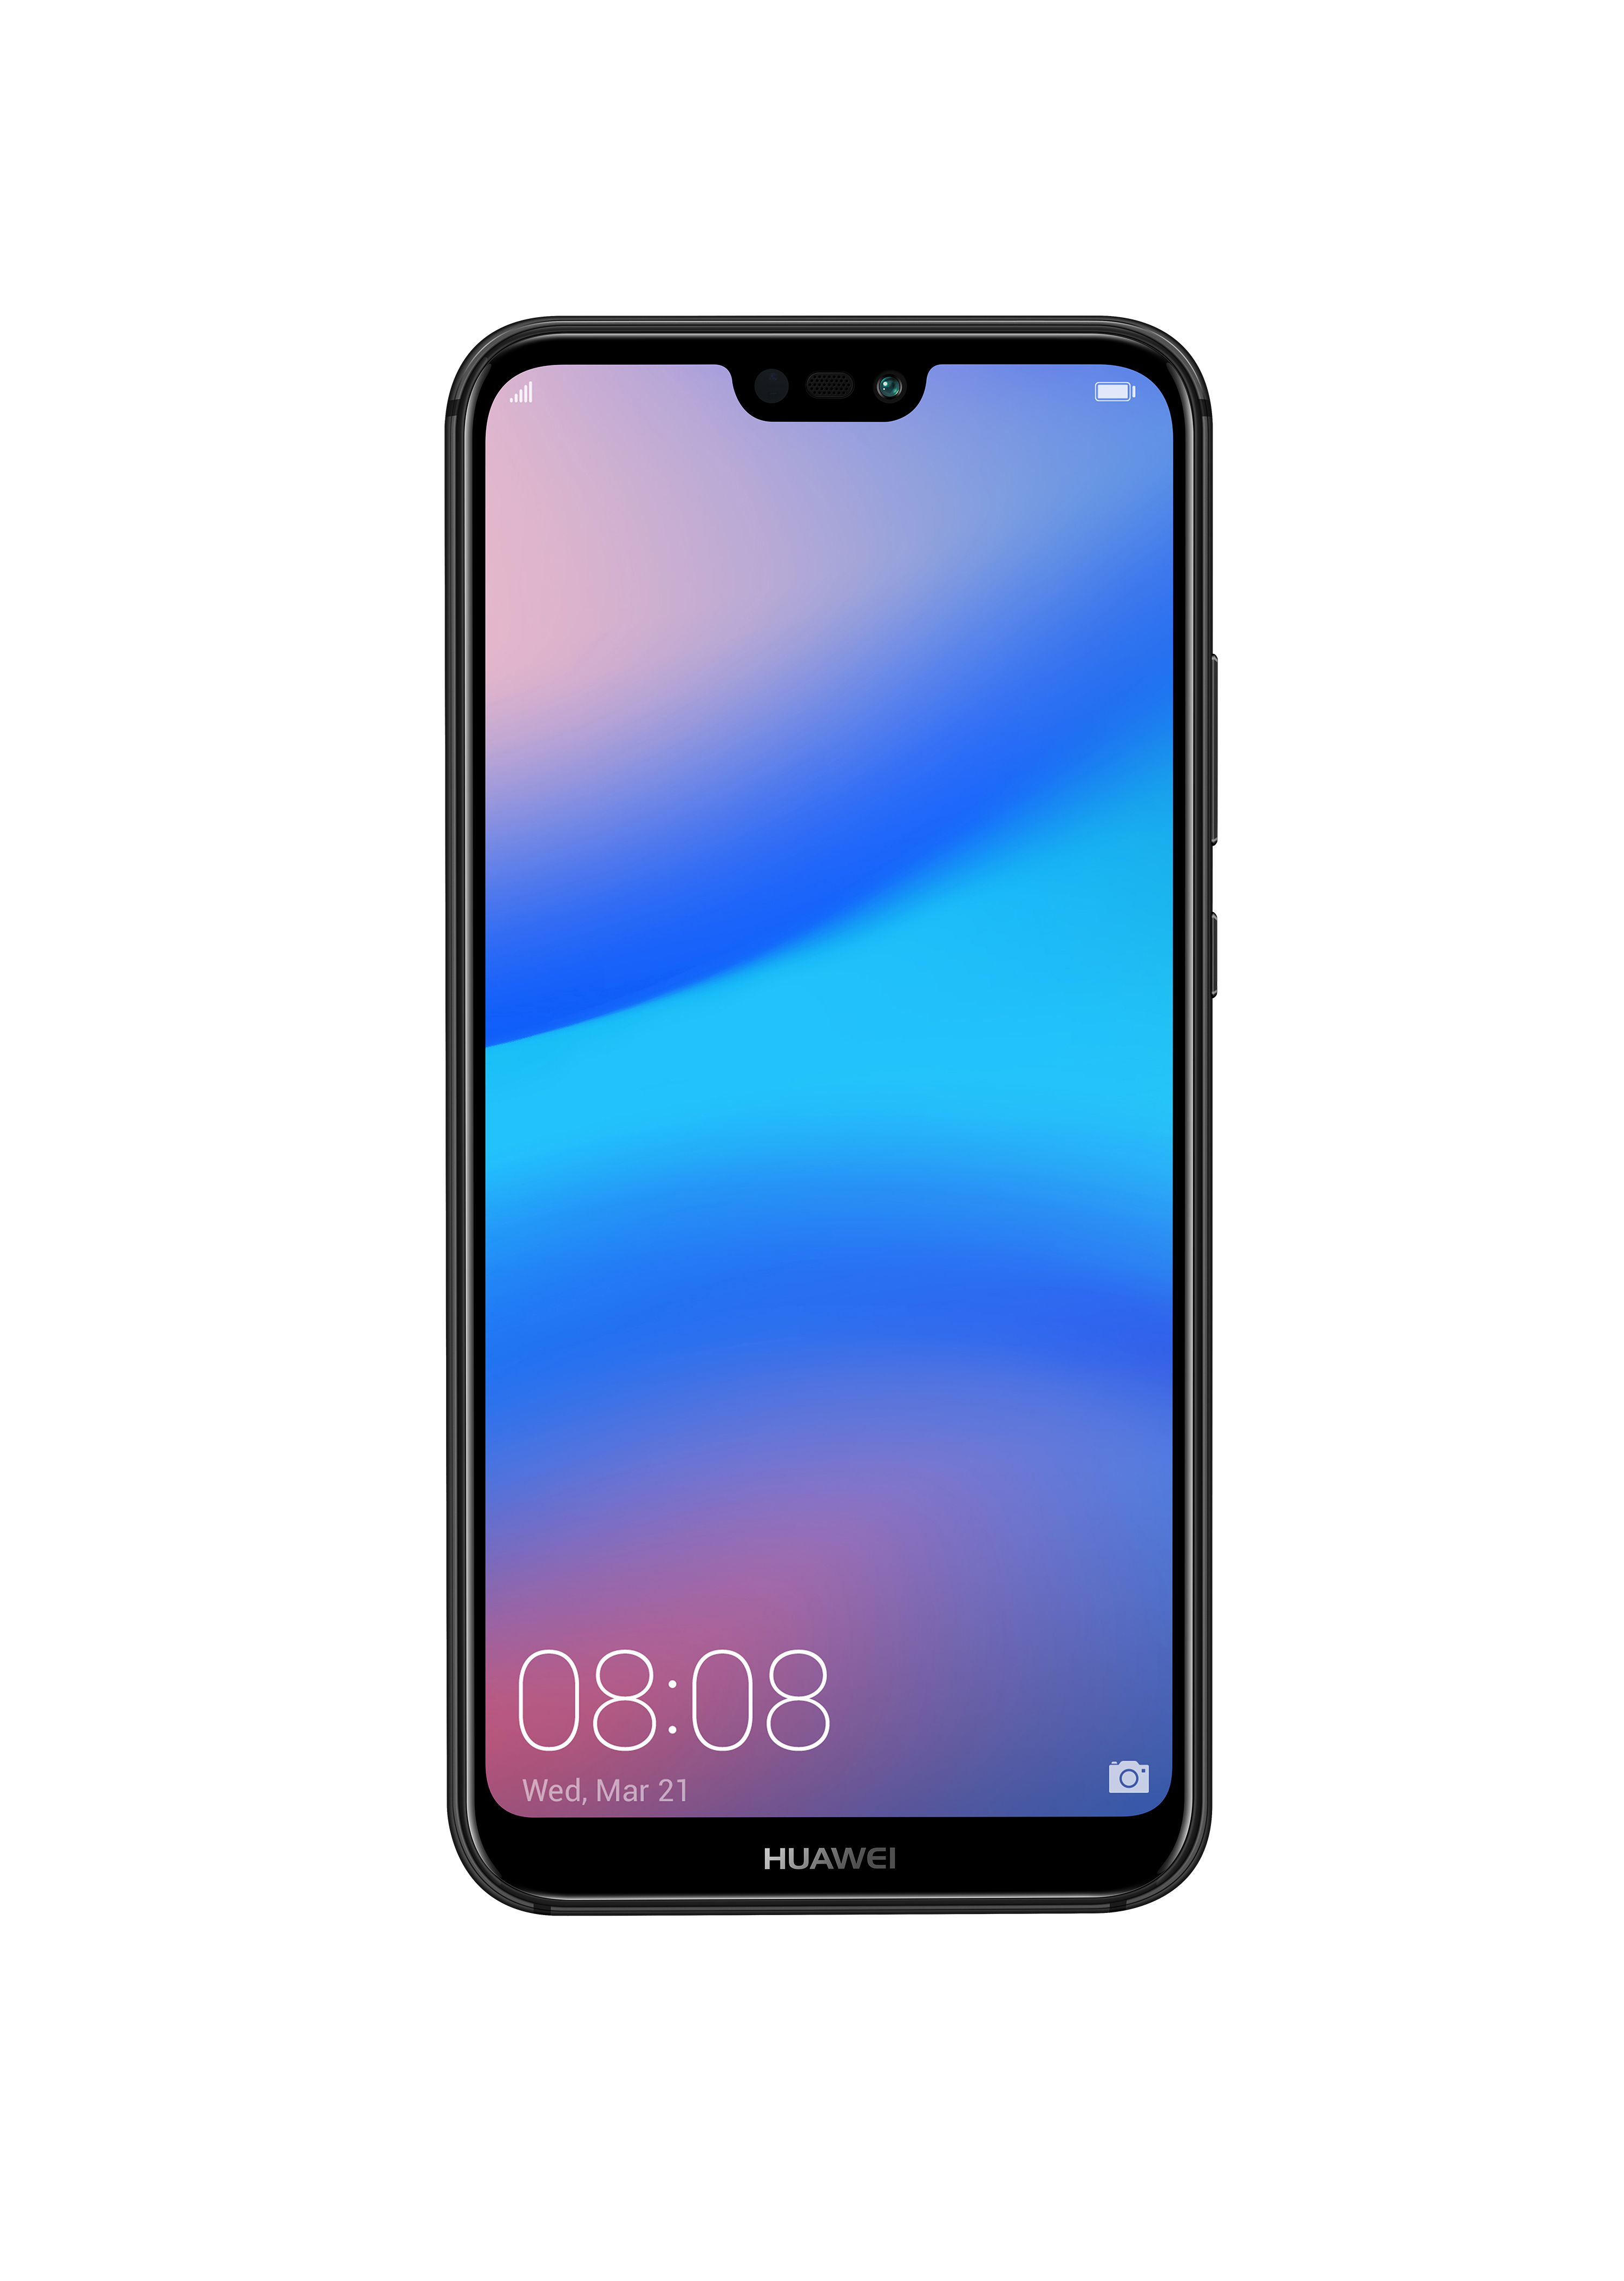 Read more about the article HUAWEI unveils the much awaited P20 series – HUAWEI P20 Pro and HUAWEI P20 lite in India